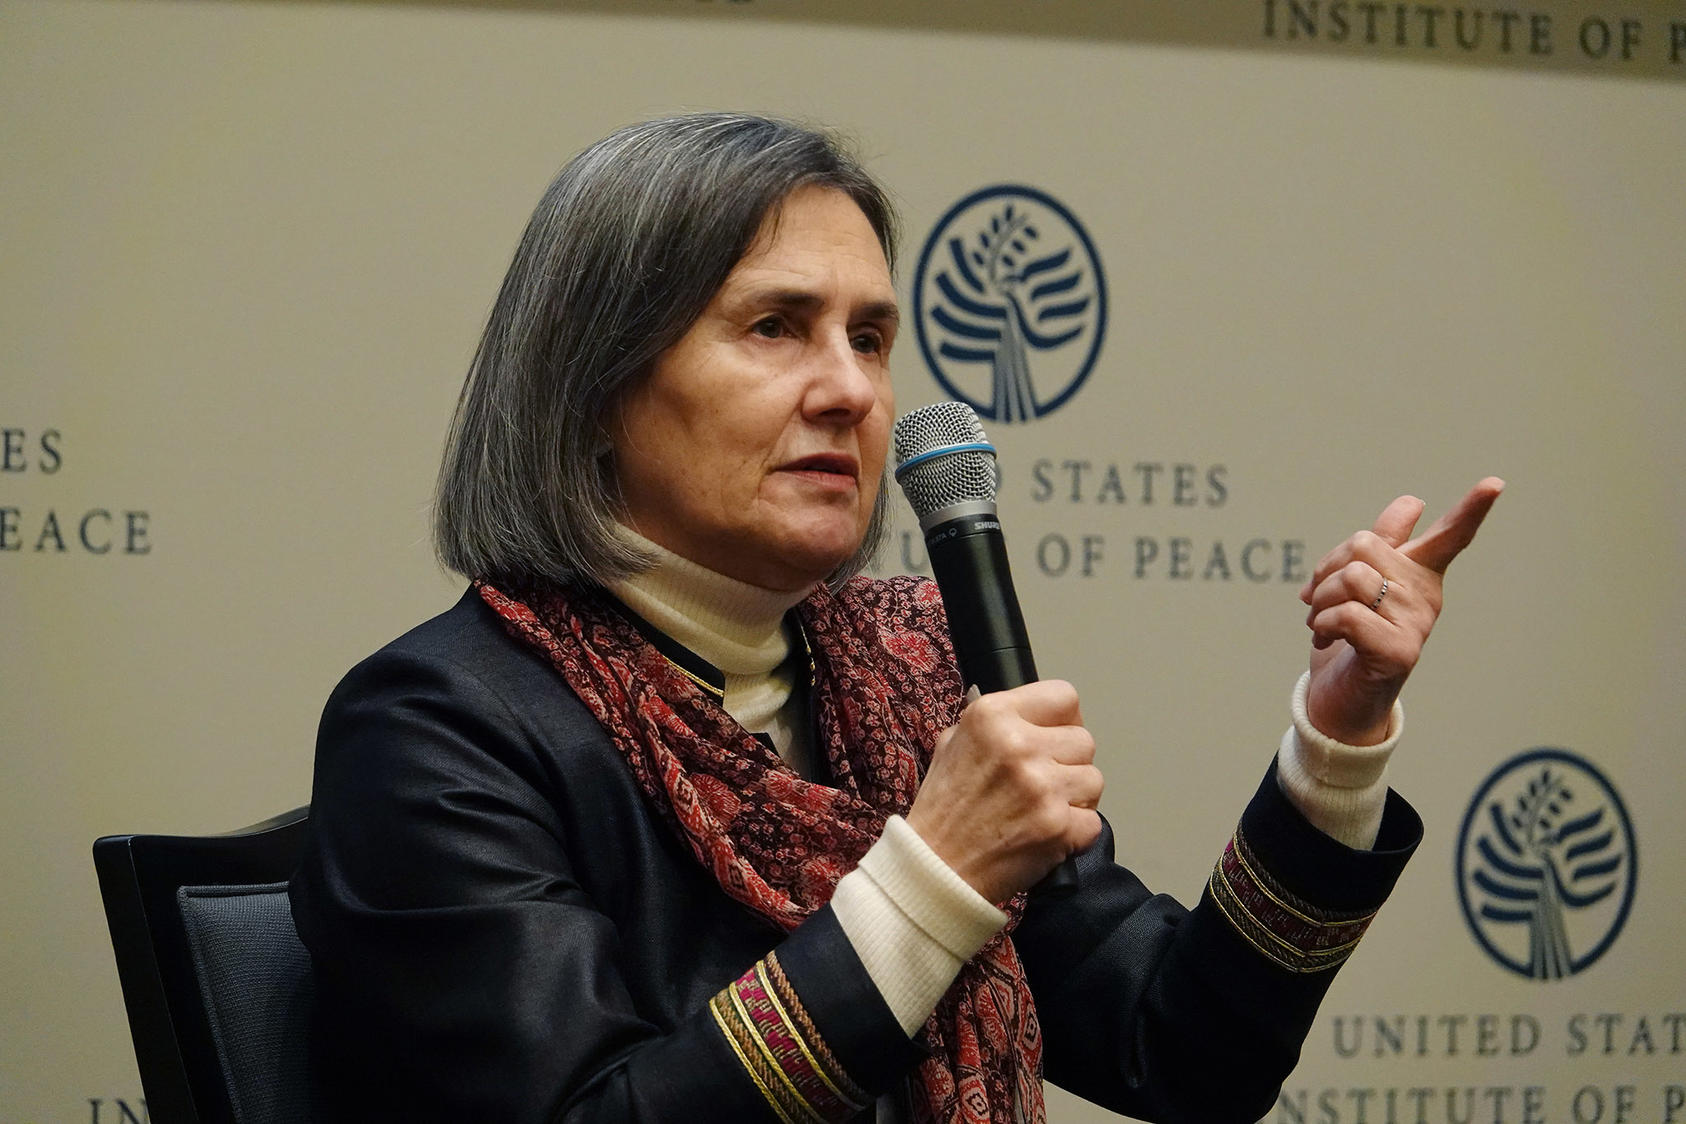 Afghan First Lady Rula Ghani spoke November 14 at USIP. “Afghanistan is progressing … in the right direction,” she said. “I want to tell everybody who has sacrificed for Afghanistan that their effort was not in vain.”